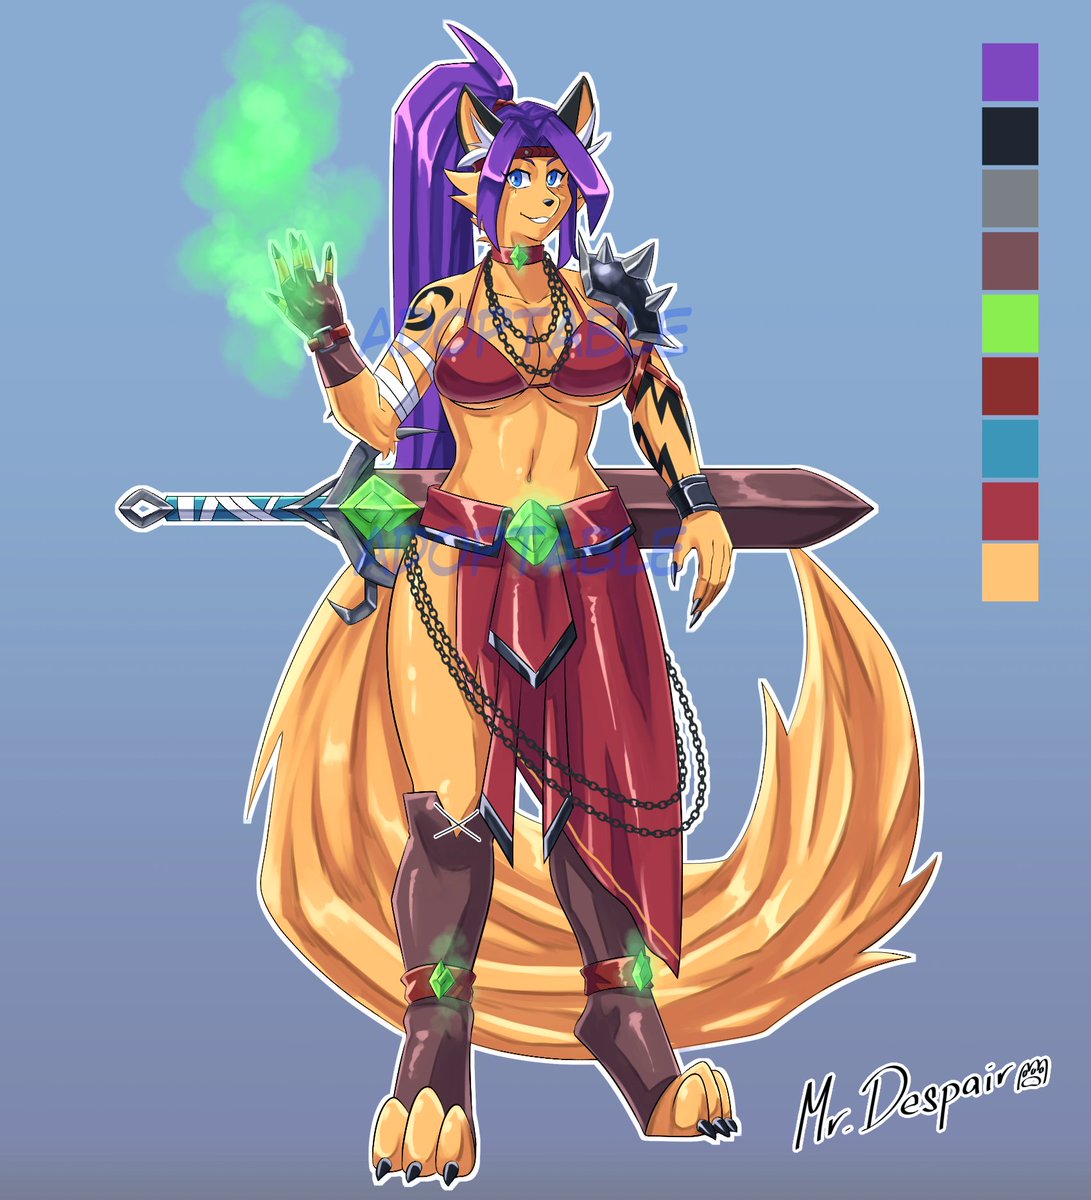 HUNTER ADOPTABLE
Link in comments

#adopt #adopts #adoptable #auction #openauction #openadoptable #originalcharacter #adoptableauction #ocadoptable #cute #anthro #adoptables #wolf #fox #female #forsale #paypal #oc #wolfadoptable #furry #characterforsale #fantasy #warrior #sword